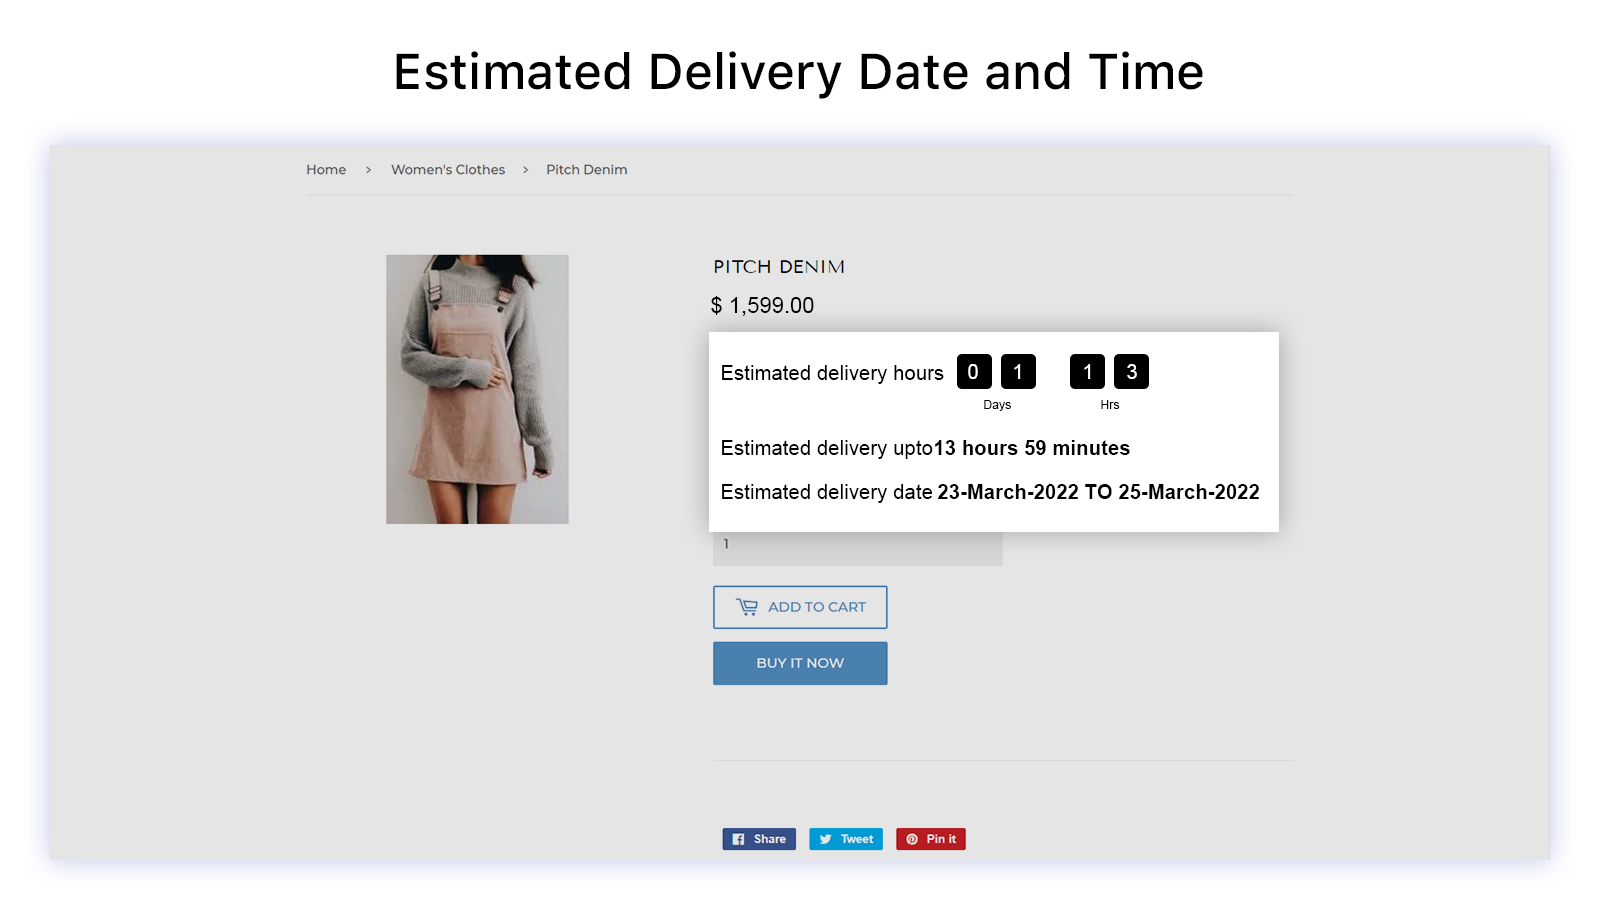 Estimated delivery date